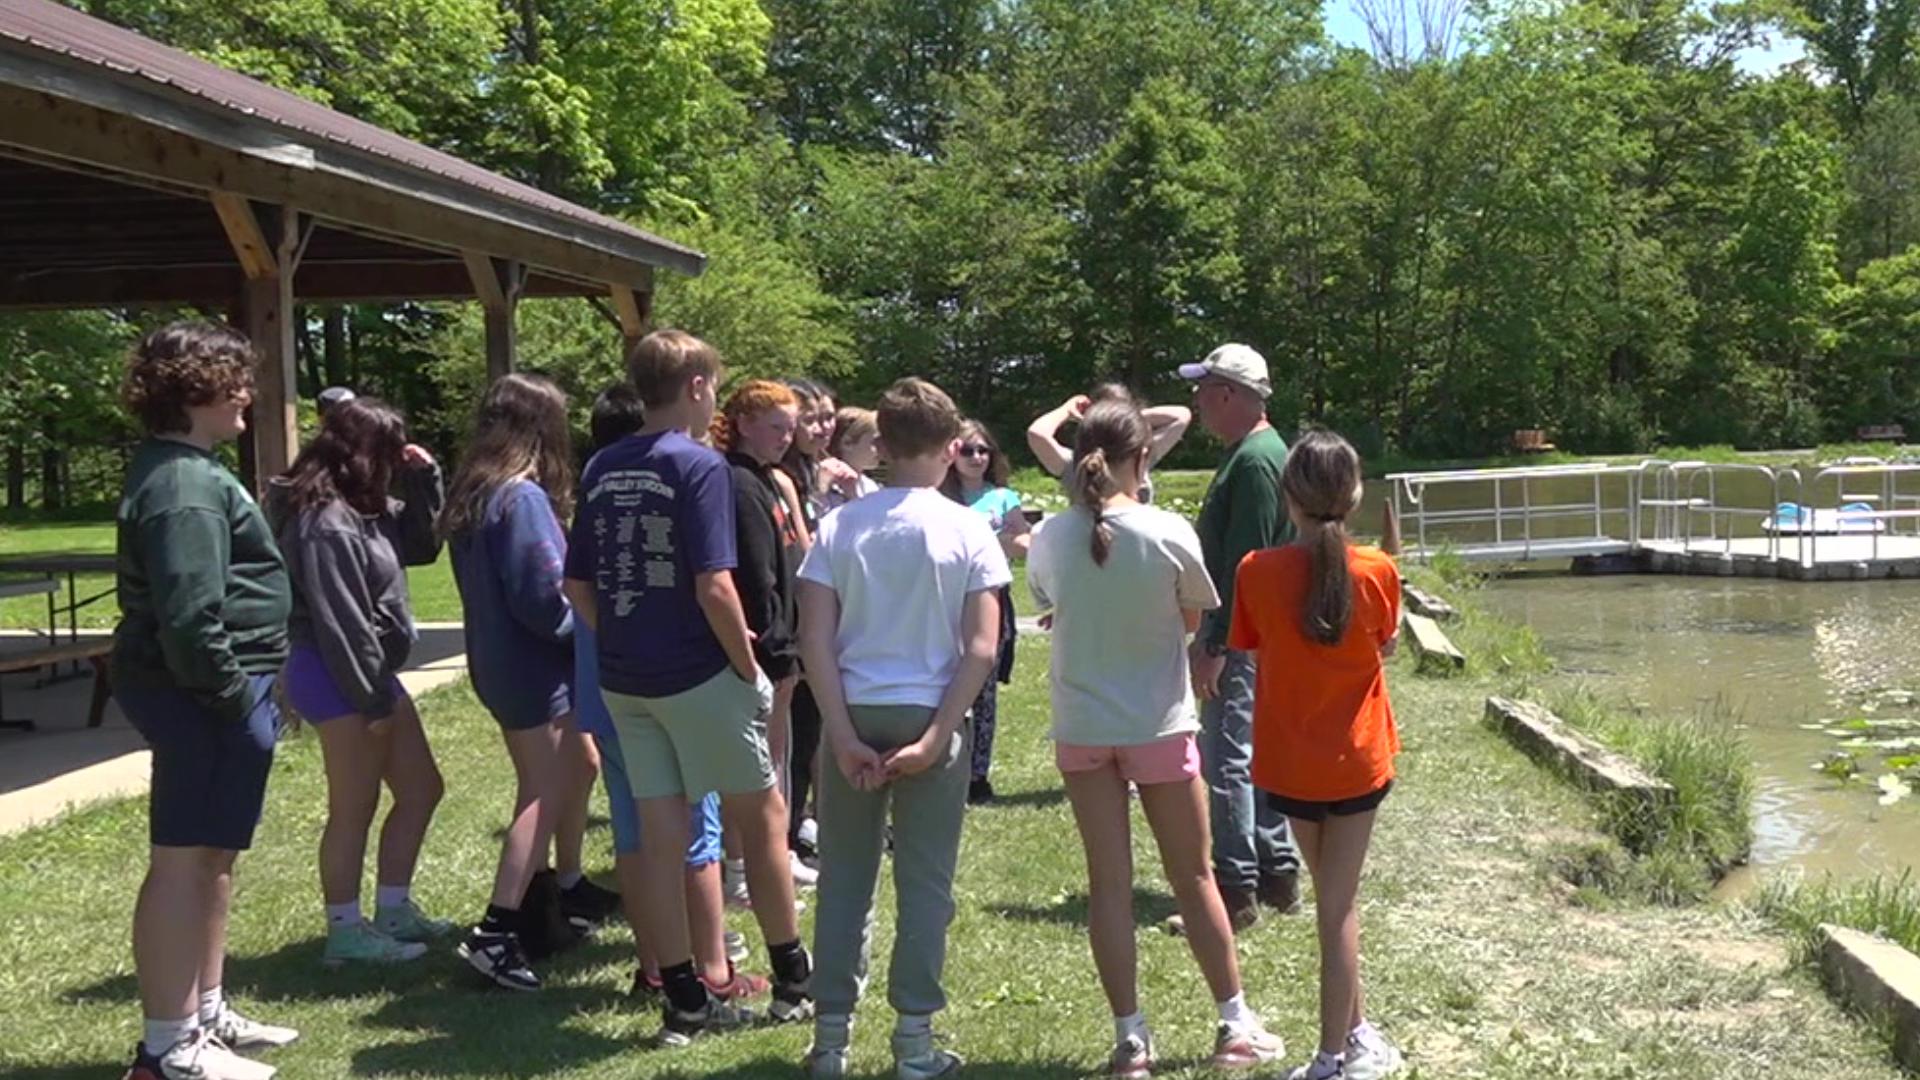 This week, students from all over central Pennsylvania have taken their lessons outside the classroom at an environmental program hosted by Camp Victory.